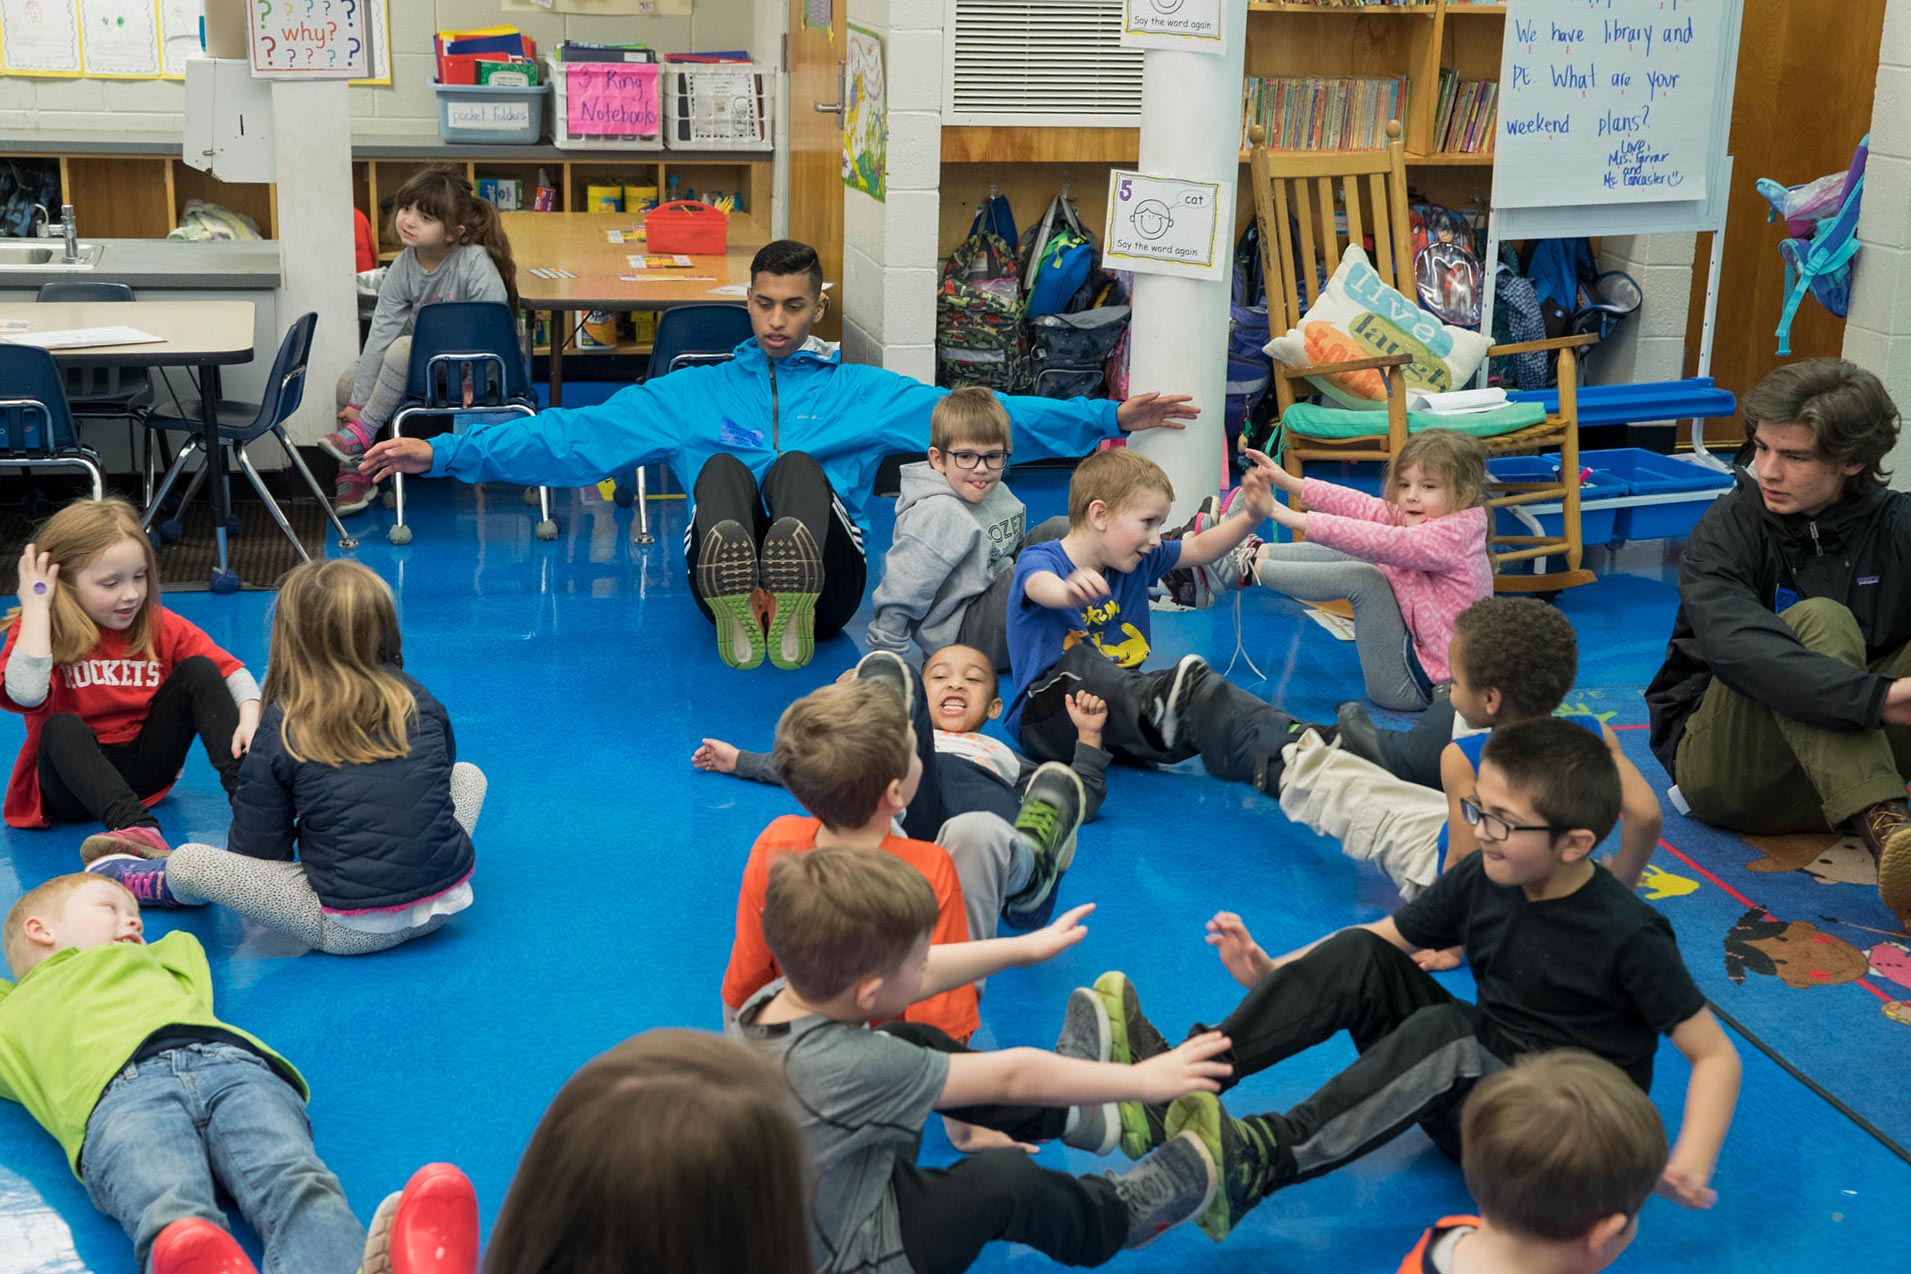 Small children and adults sit on the floor and hold their feet and arms up in partner groups